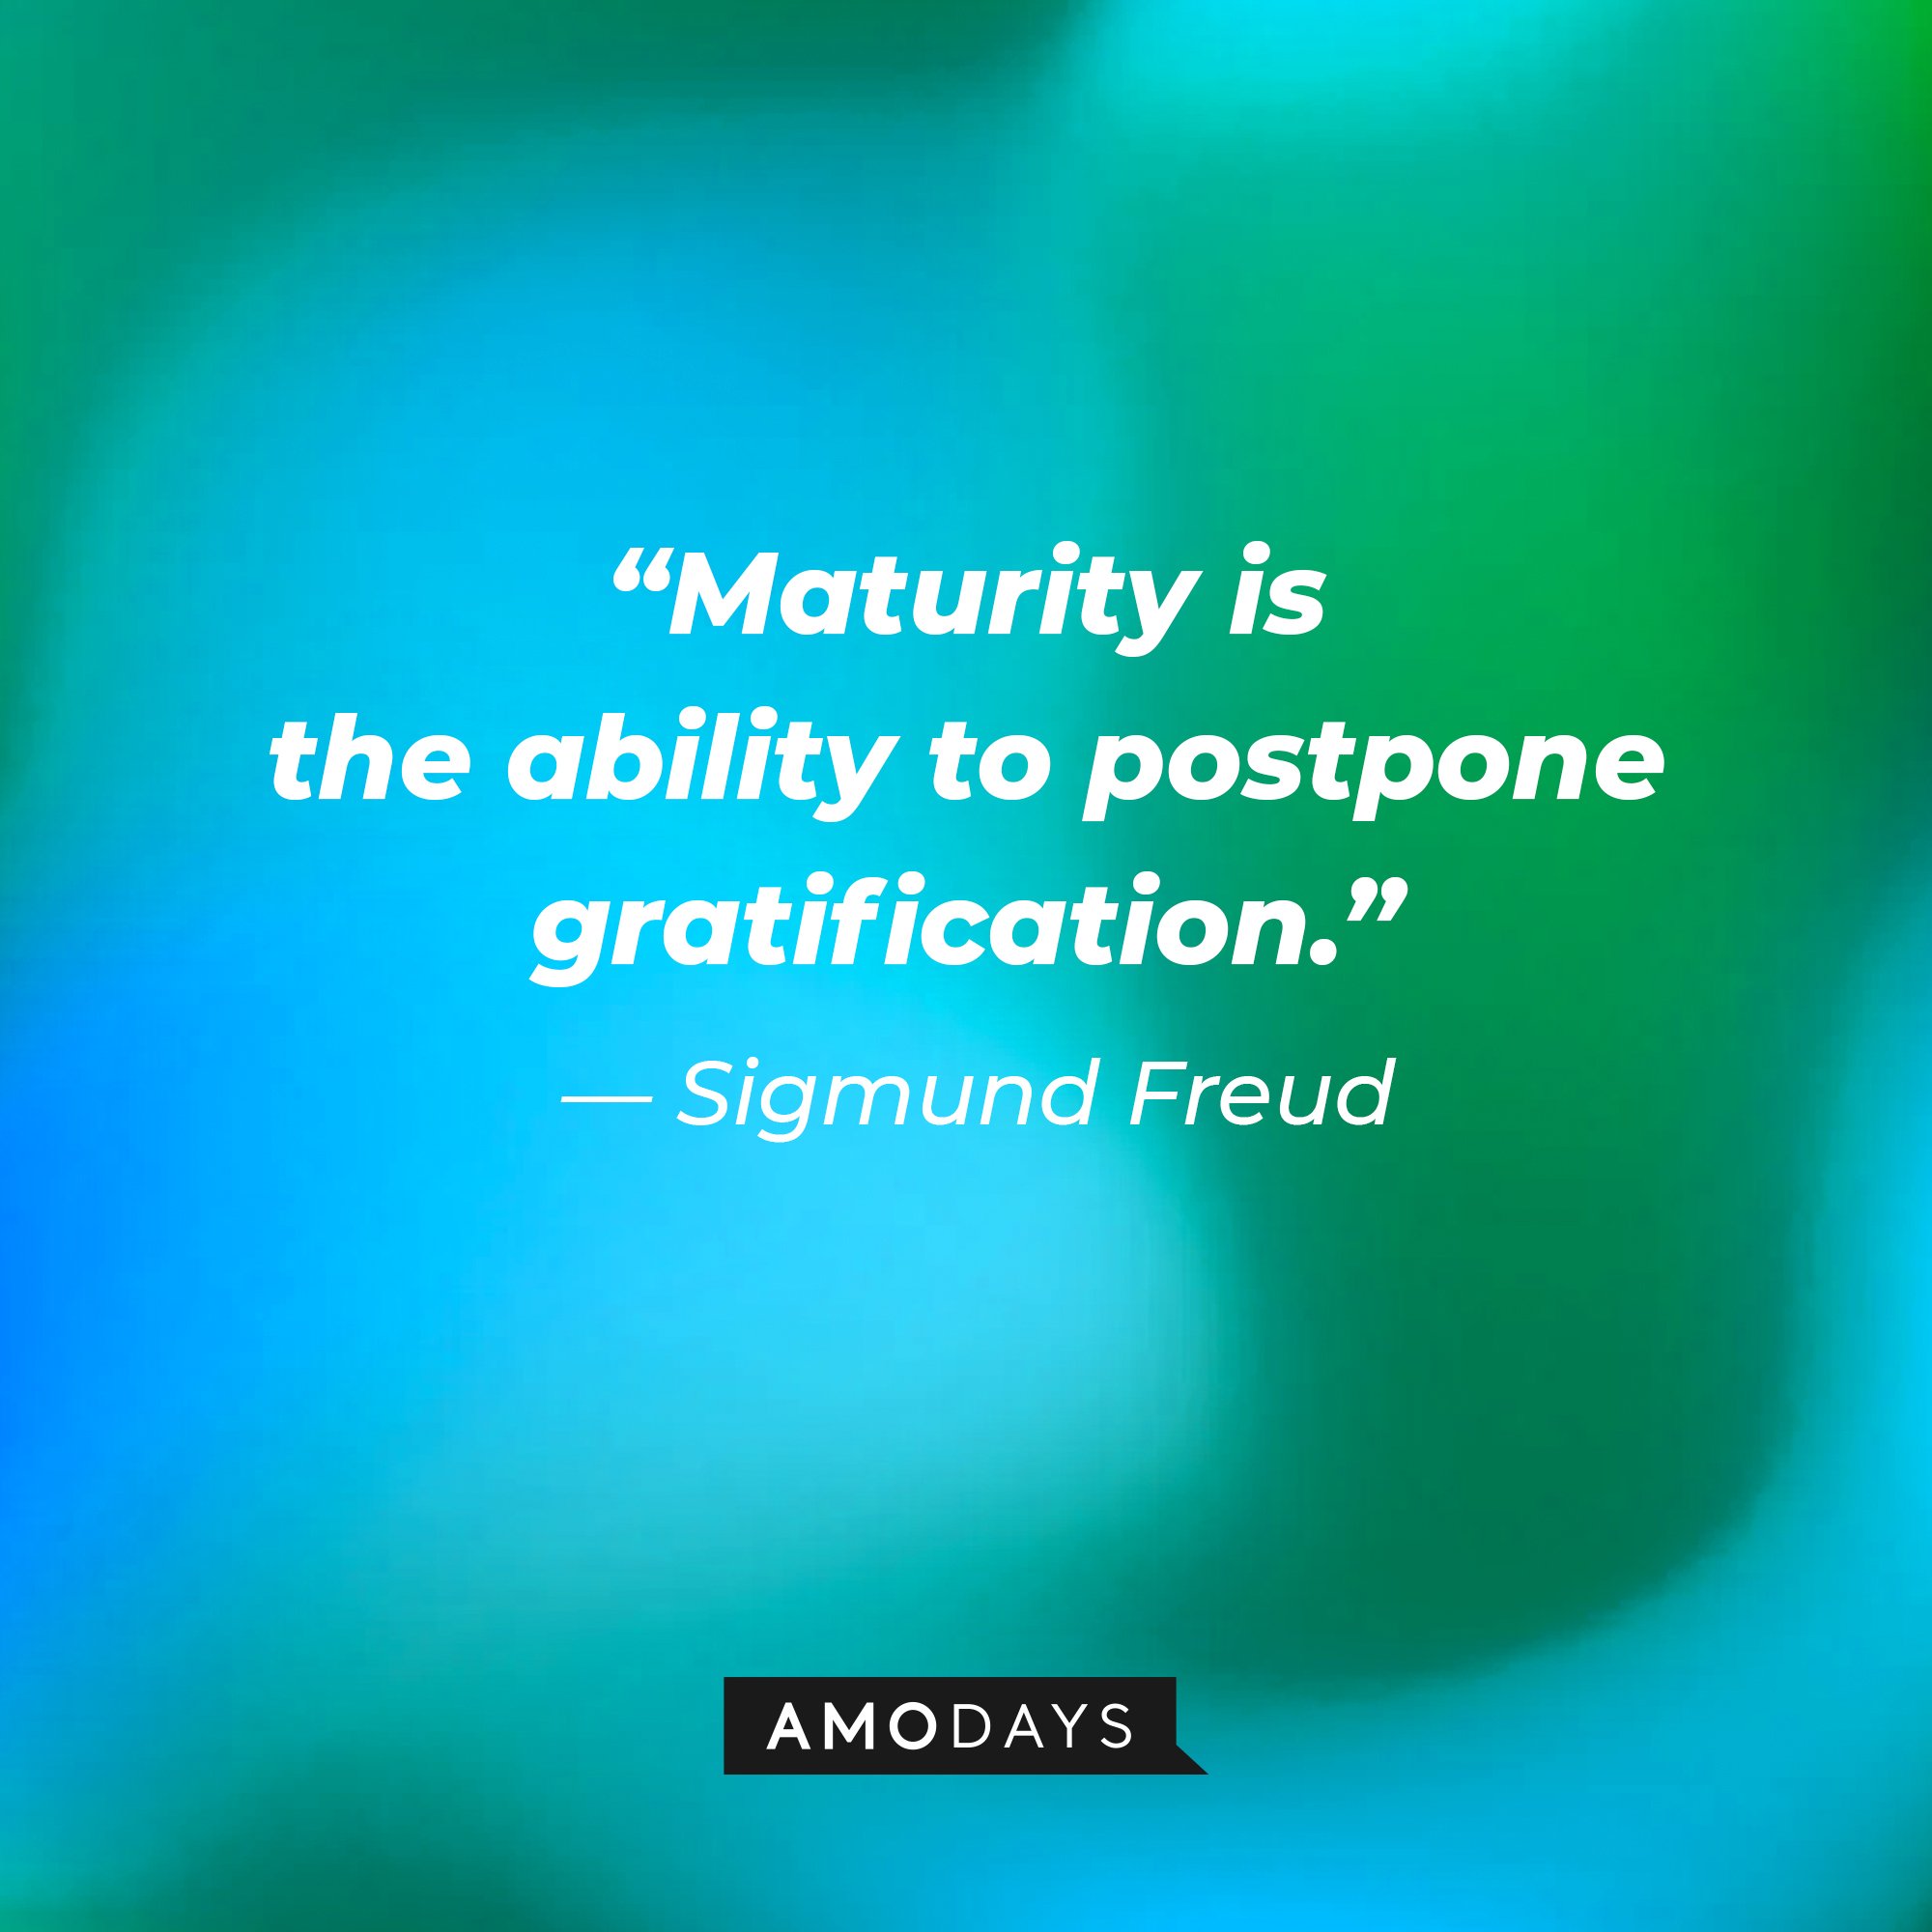 Sigmund Freud's quote: “Maturity is the ability to postpone gratification.” | Image: AmoDays